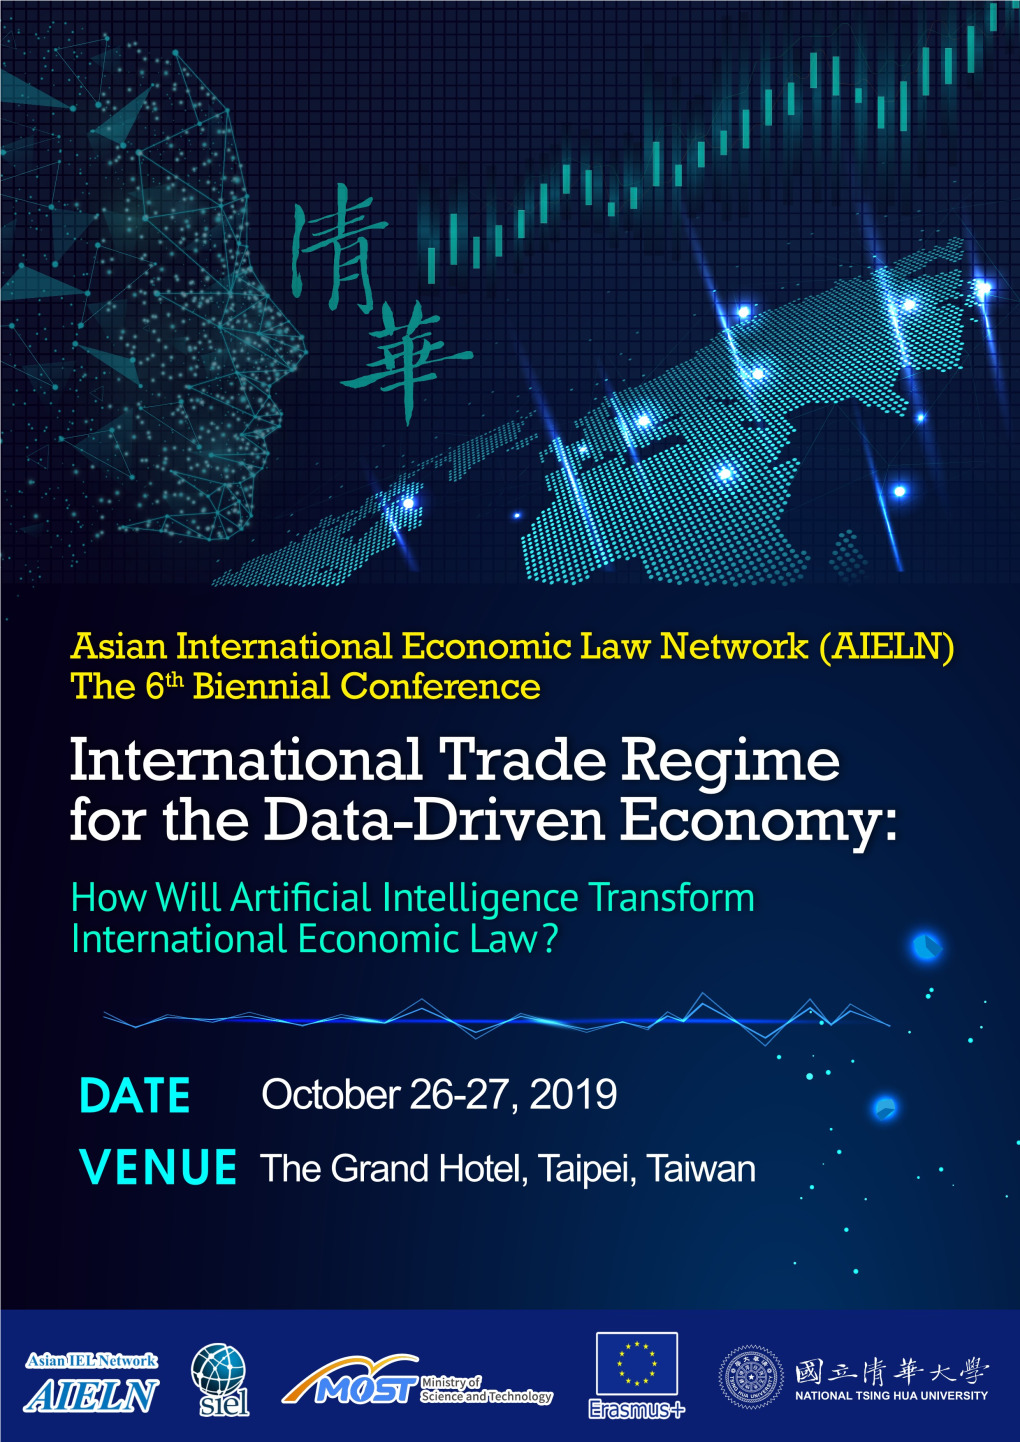 International Trade Regime for the Data-Driven Economy: How Will Artificial Intelligence Transform International Economic Law?